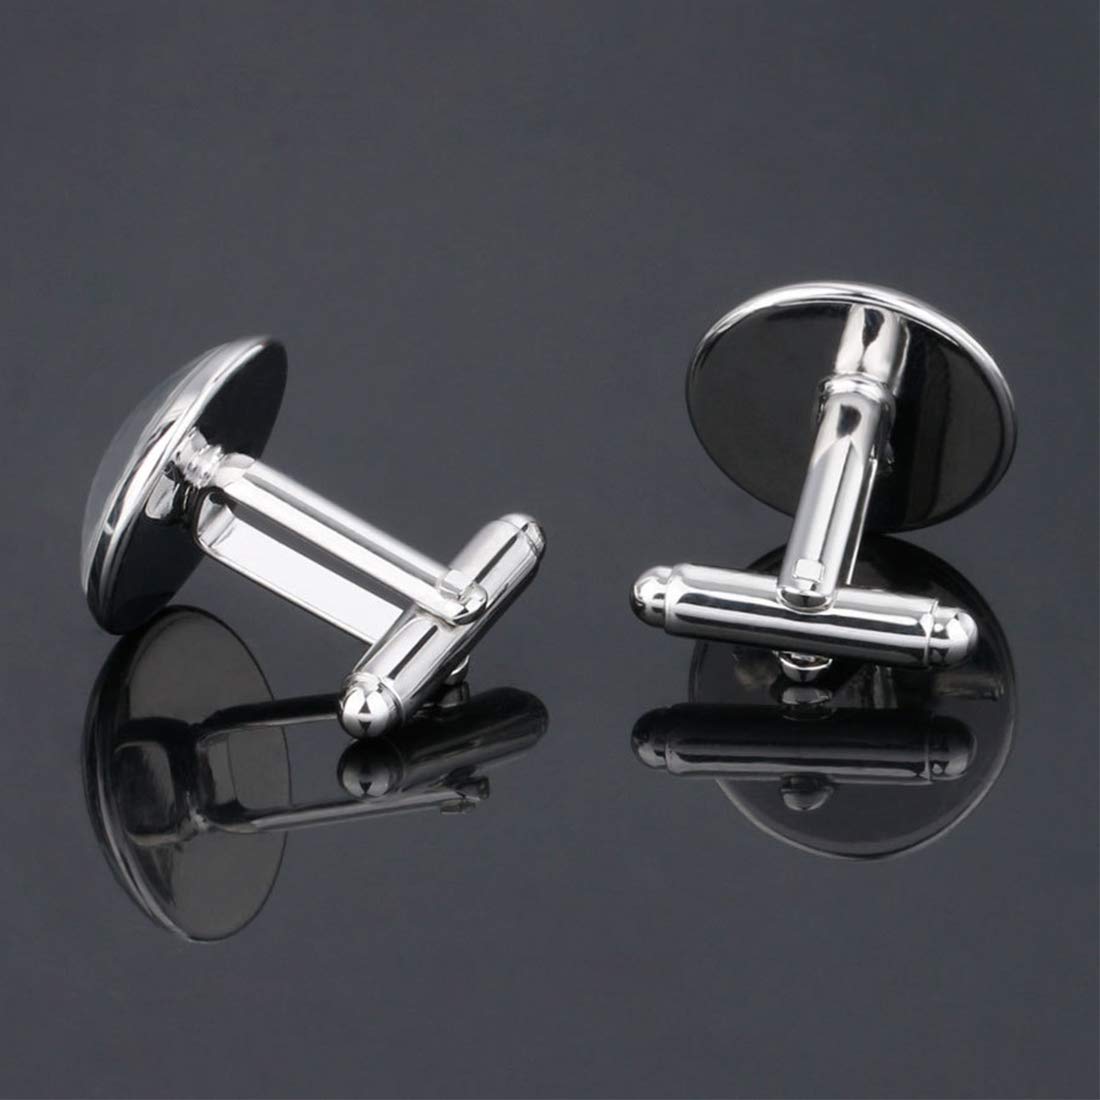 Yellow Chimes Cufflinks for Men Alphabets Cuff links A Letter Statement Stainless Steel Cufflinks for Men and Boy's.